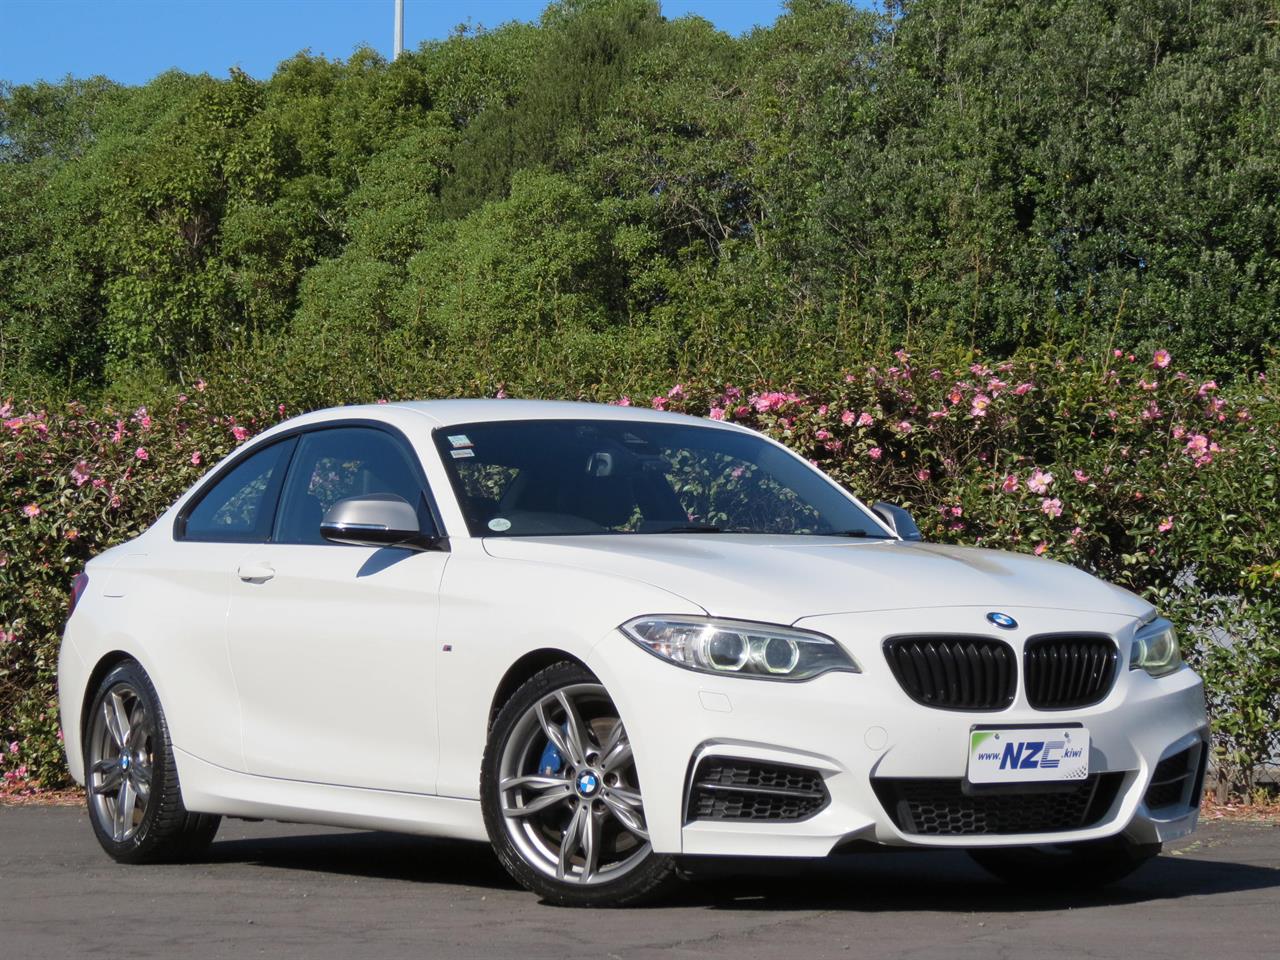 NZC 2015 BMW M235i just arrived to Auckland